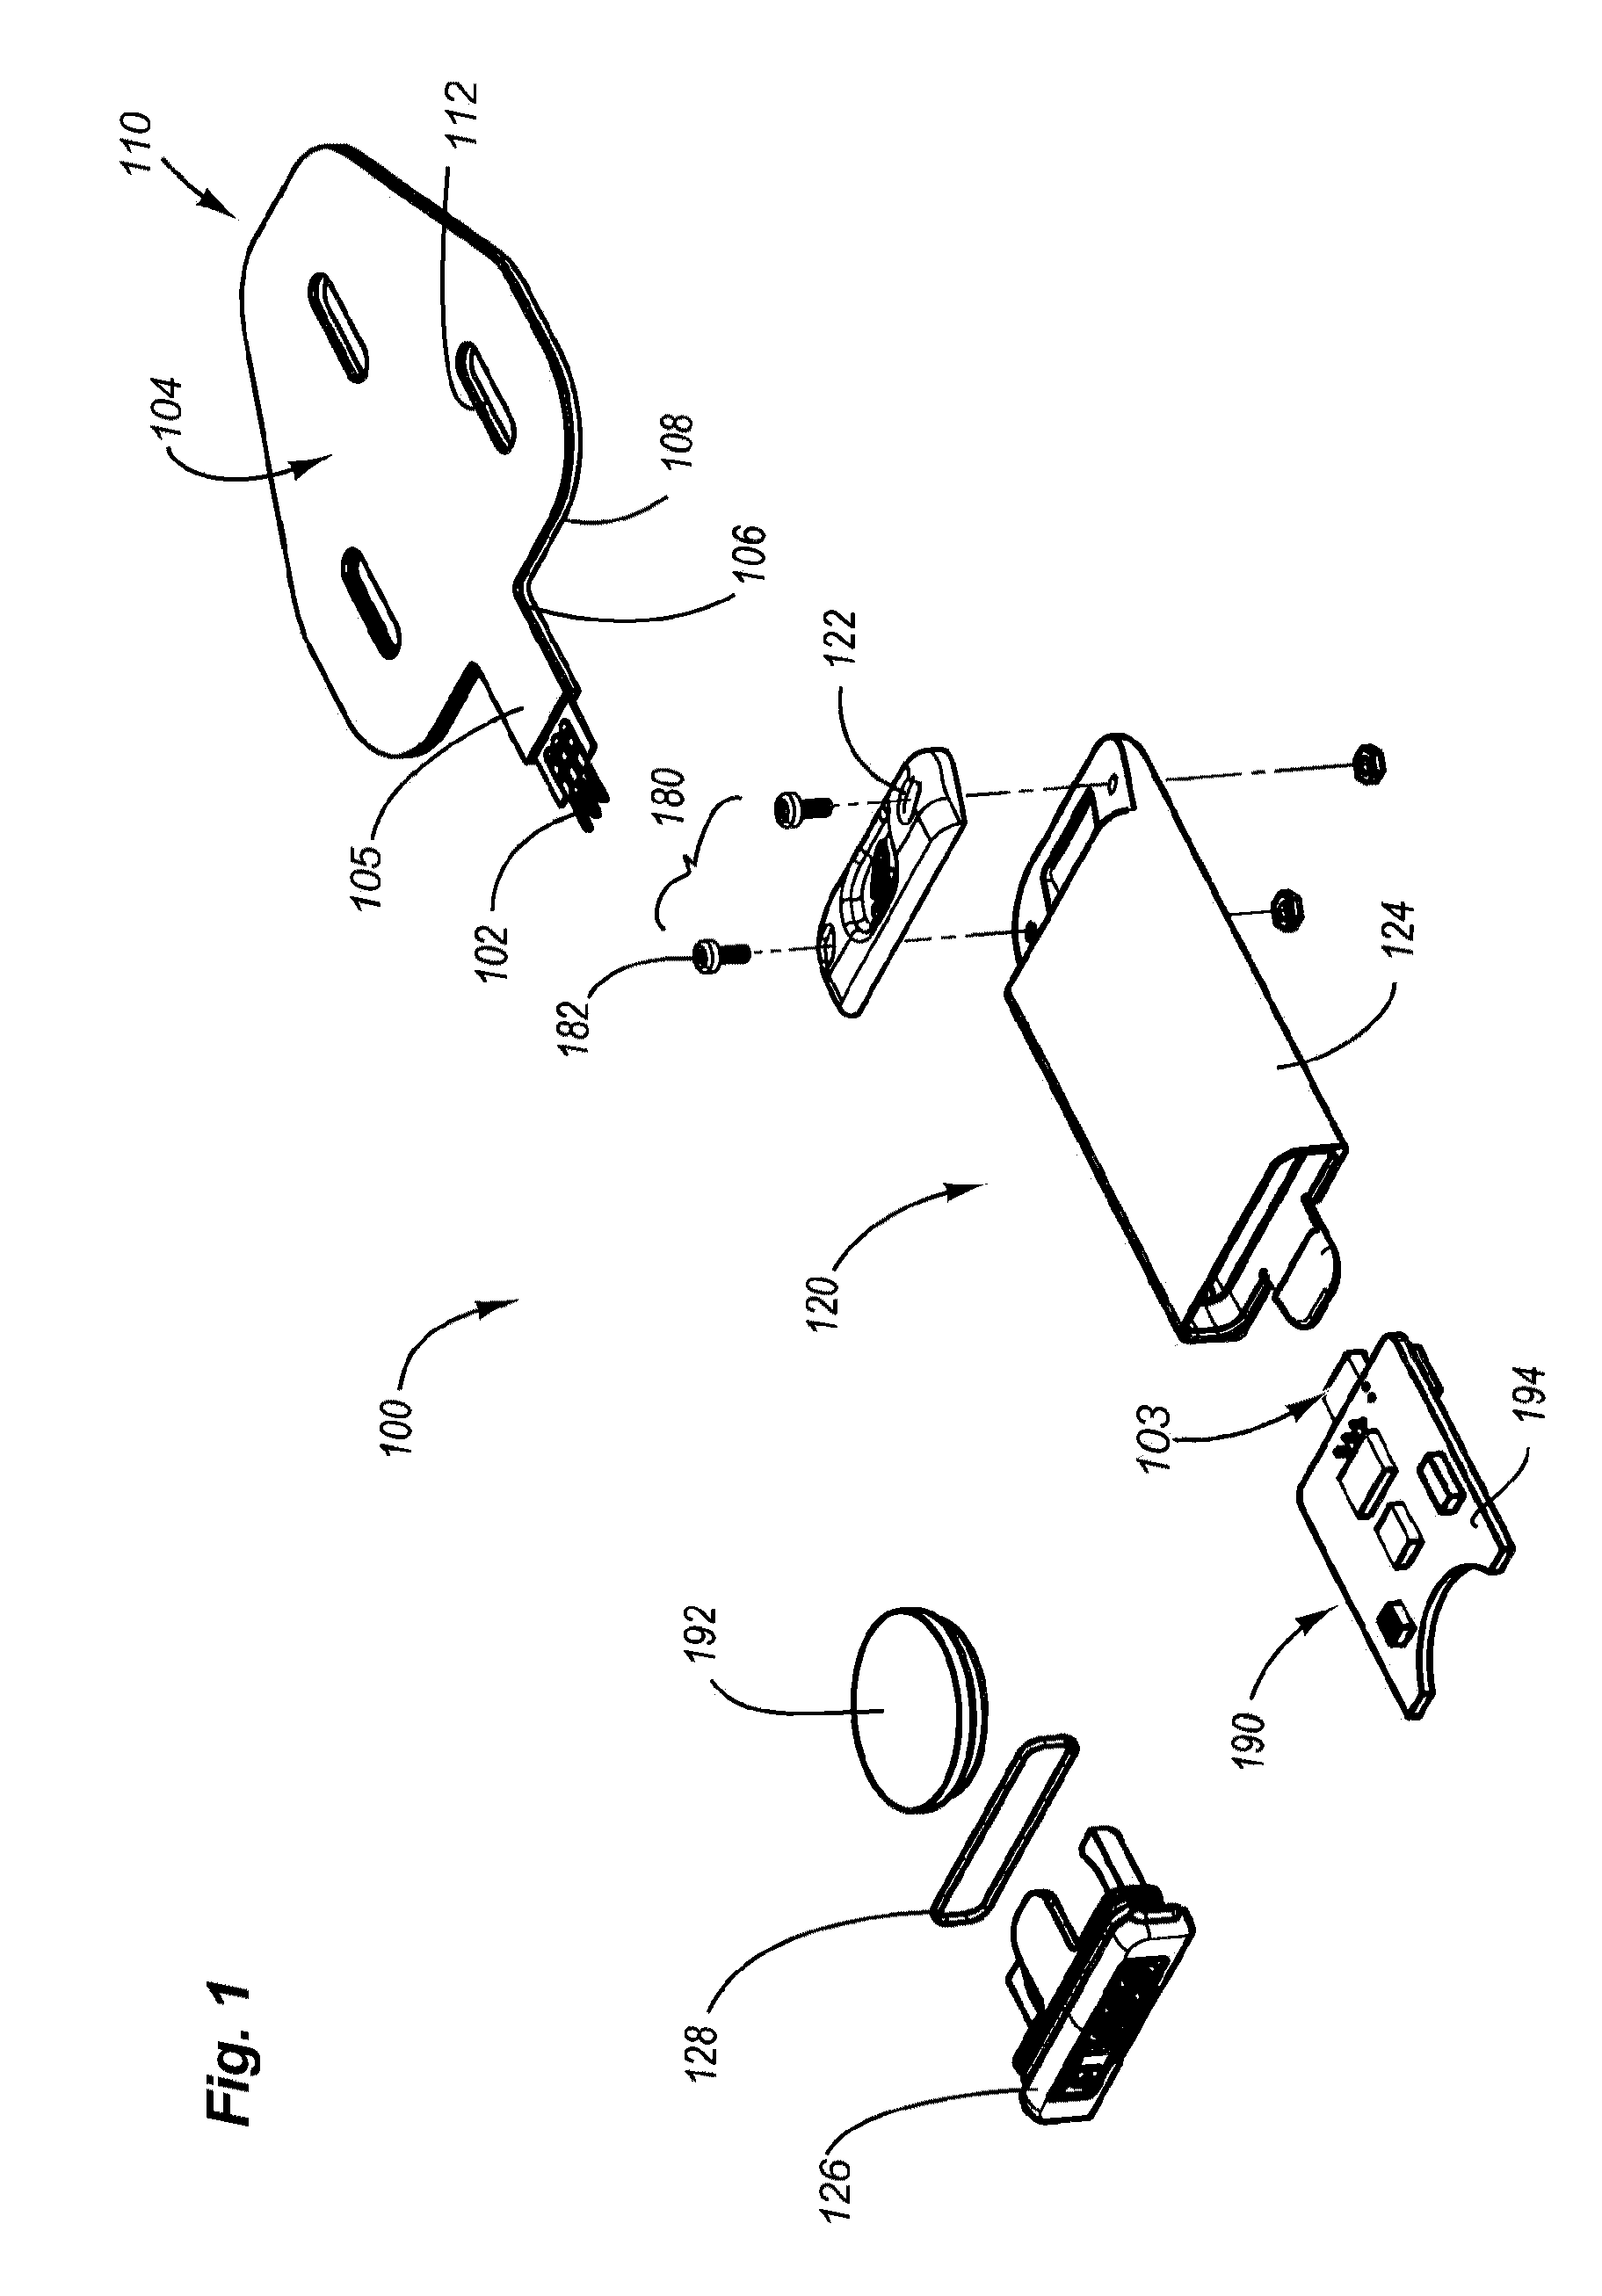 Systems and Methods of Power Output Measurement